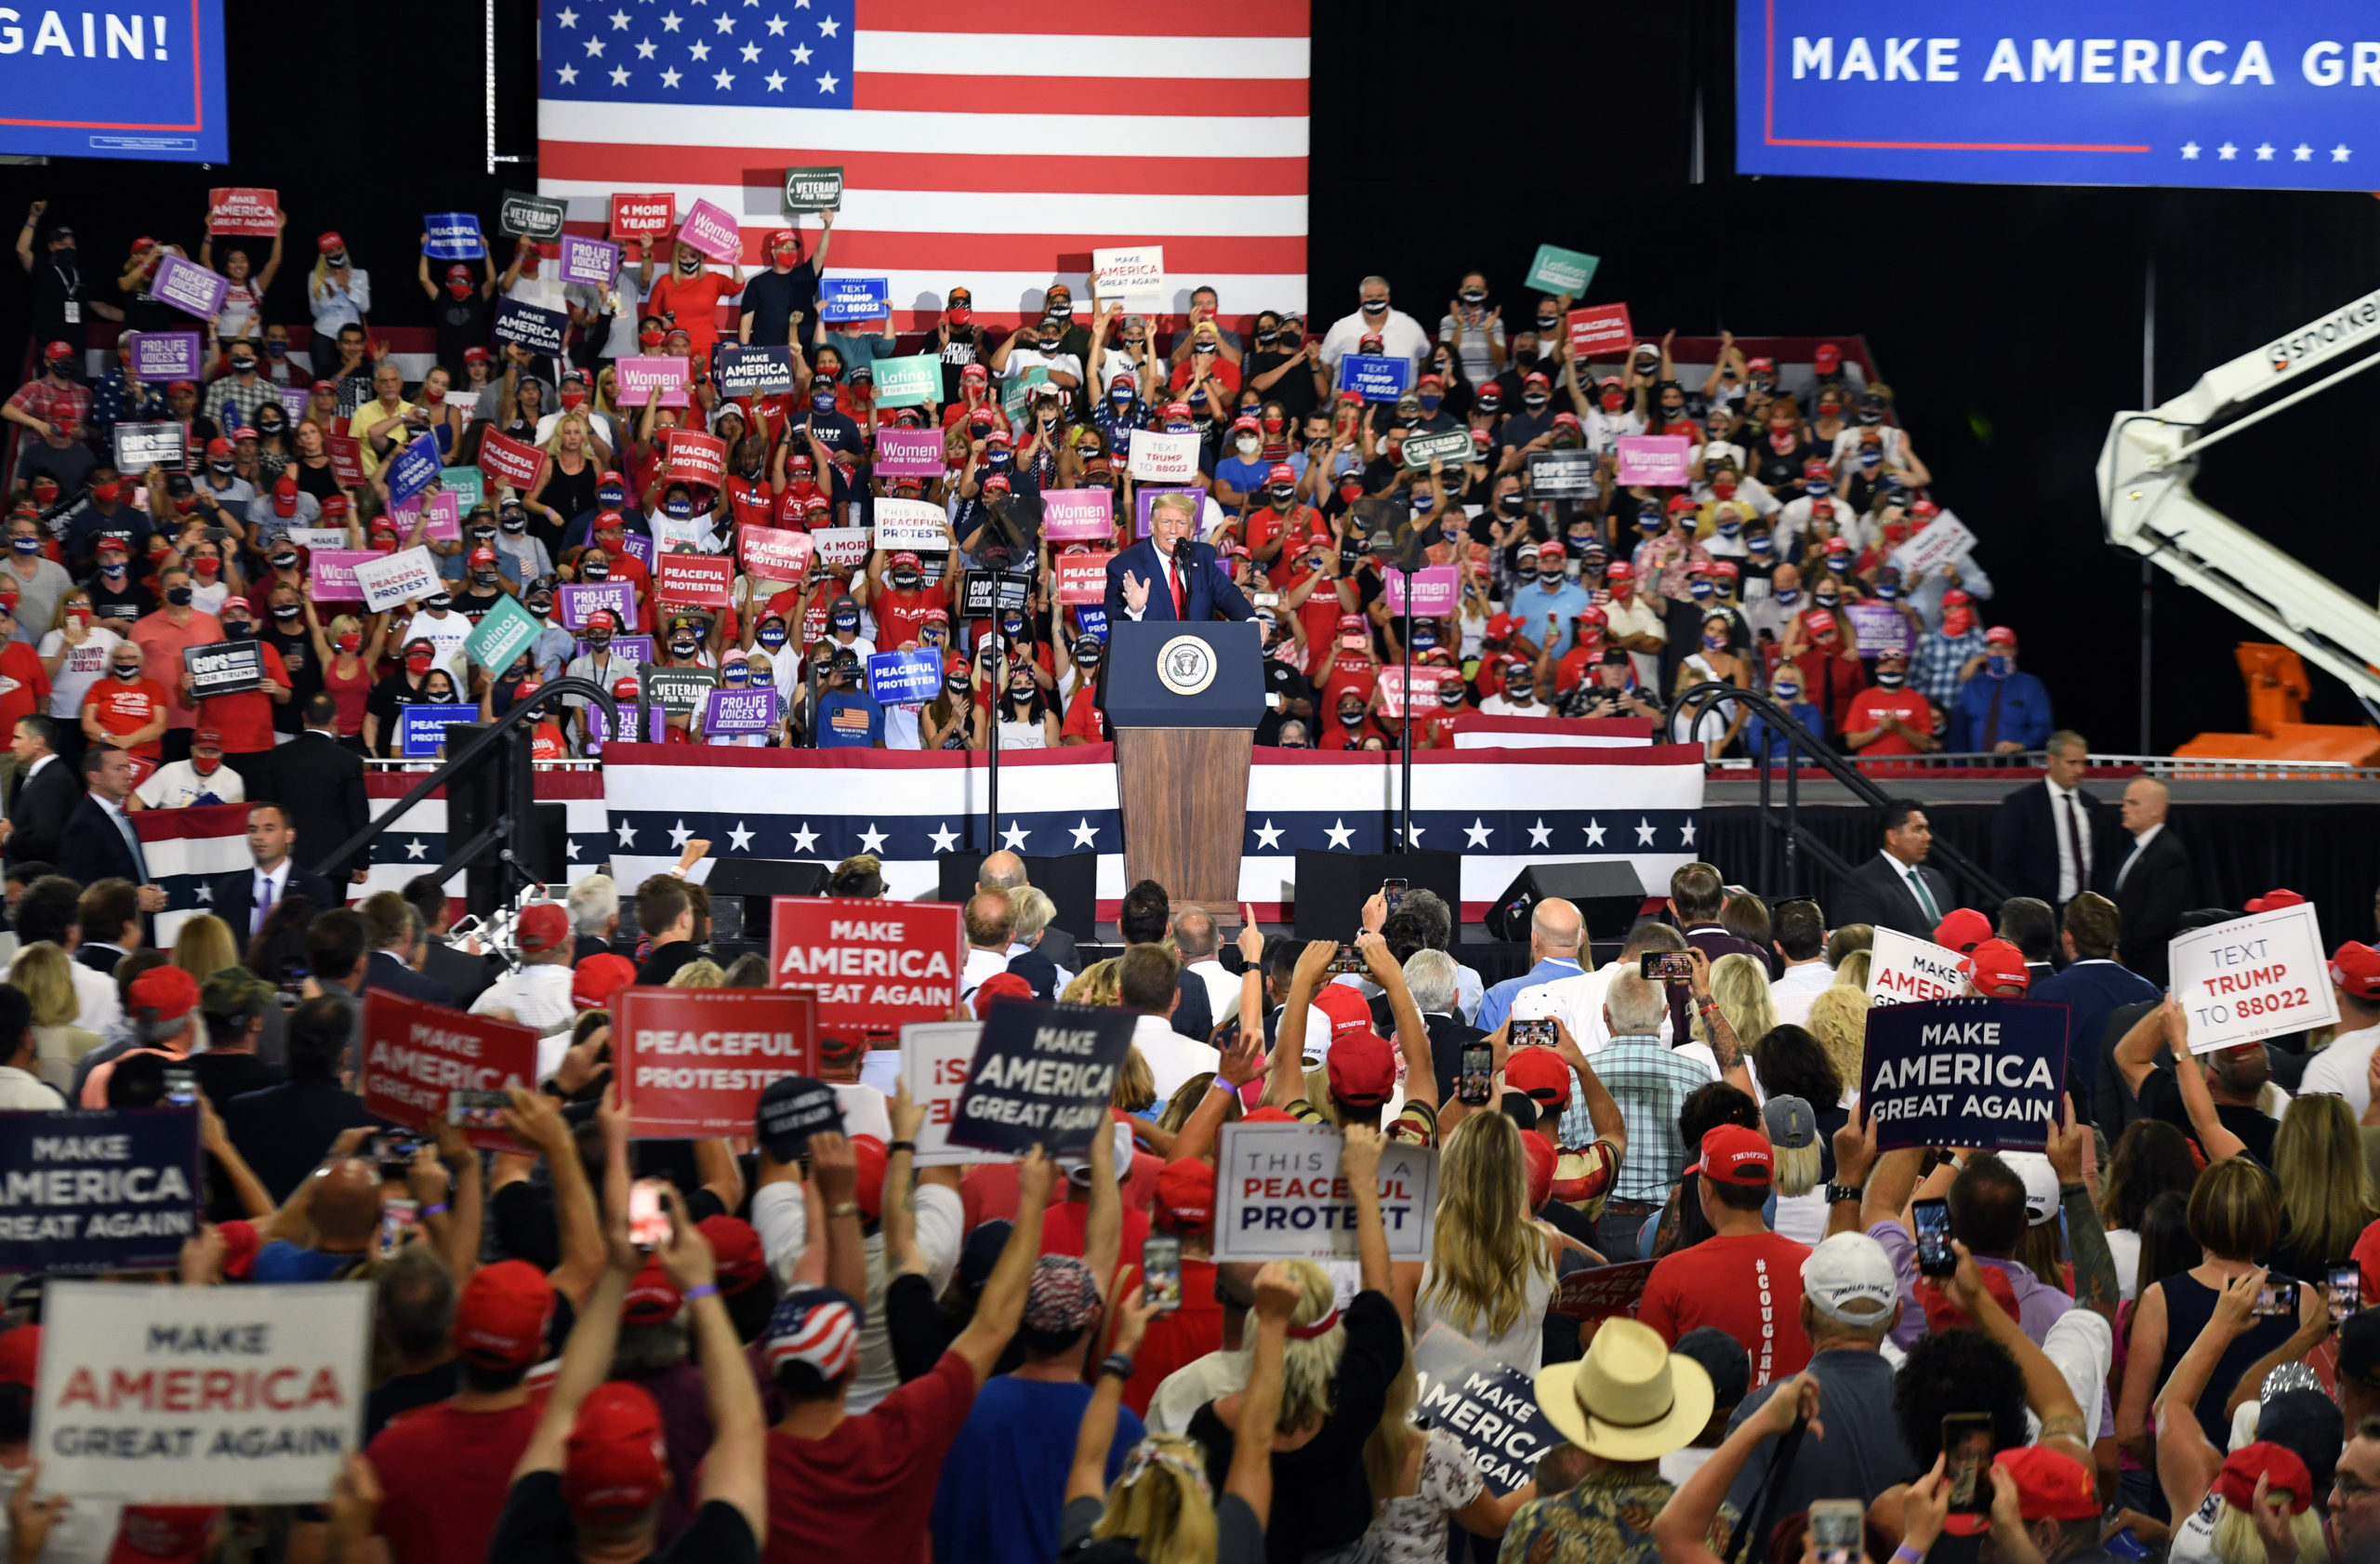 U.S. President Donald Trump speaks during a campaign event at Xtreme Manufacturing on September 13, 2020 in Henderson, Nevada. (Photo: Ethan Miller, Getty Images)